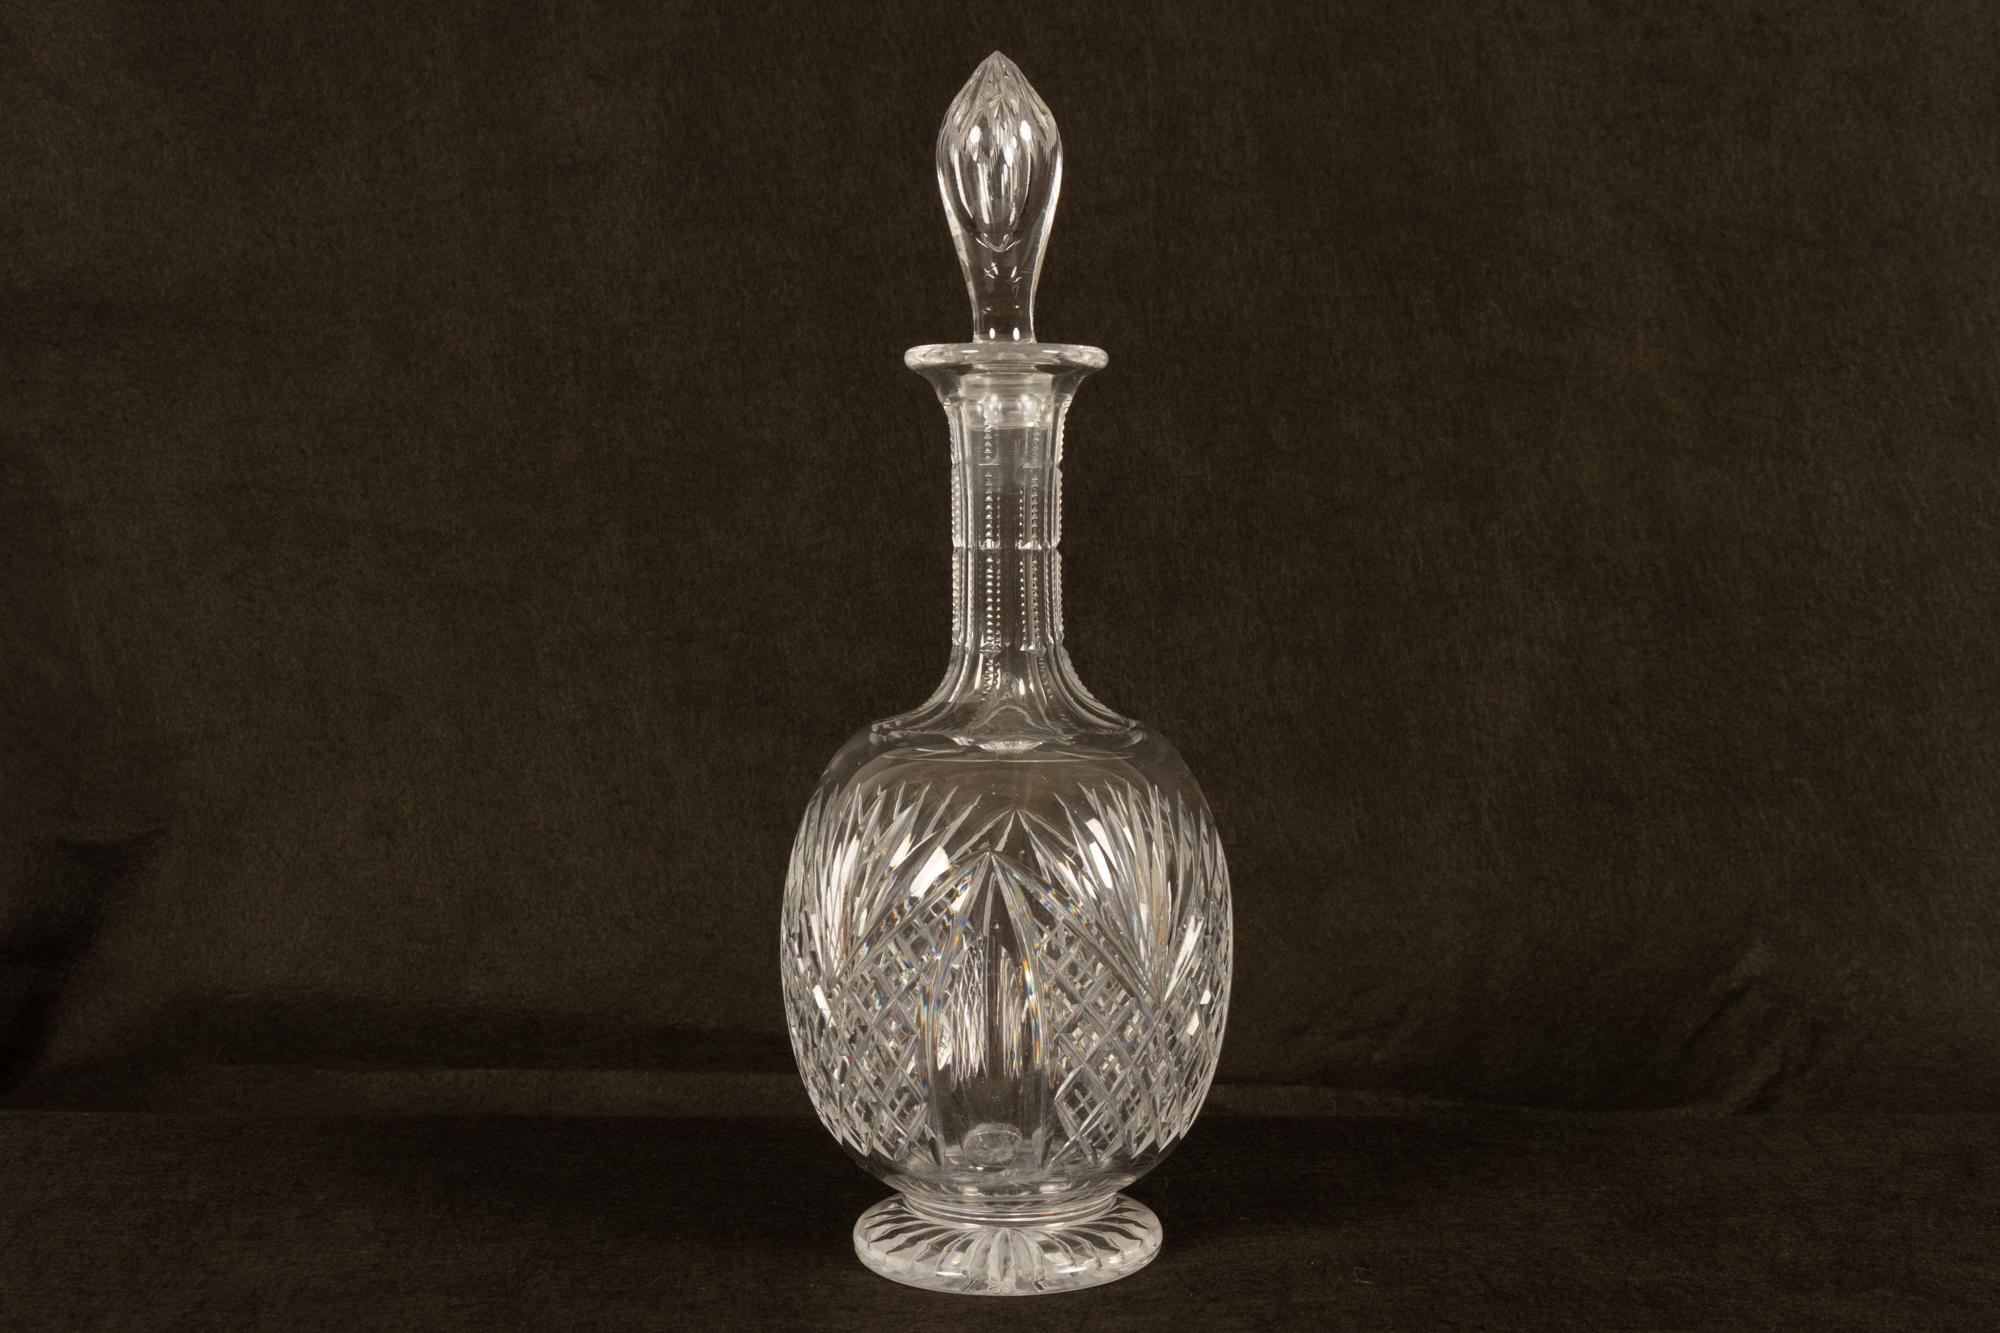 Czech Set of 4 Crystal Decanters, Mid-20th Century